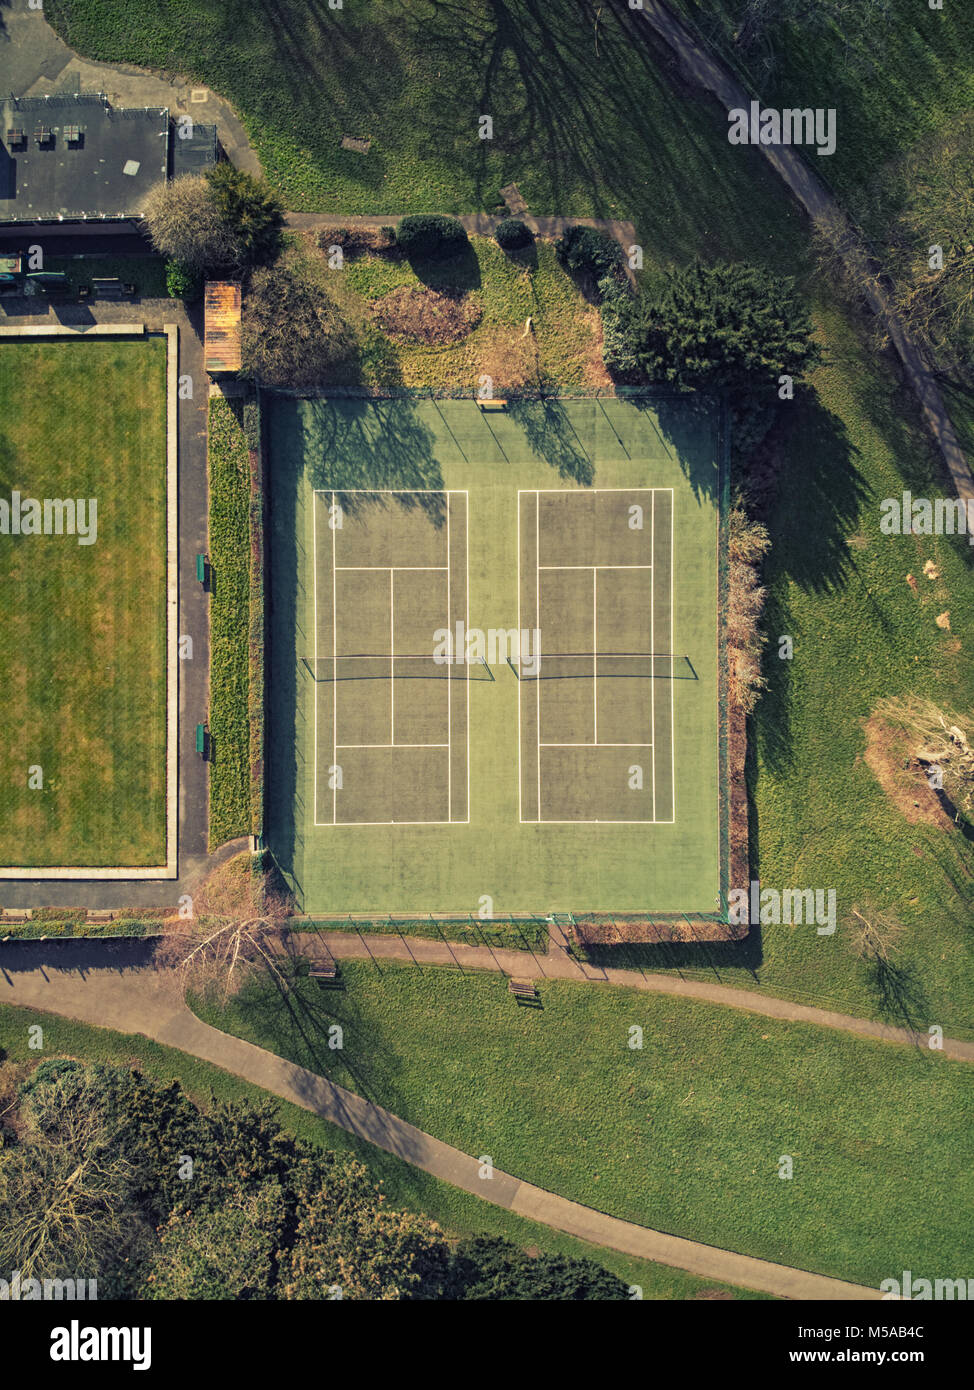 Aerial view of Tennis courts on a sunny day, nets visible in shadow Stock Photo